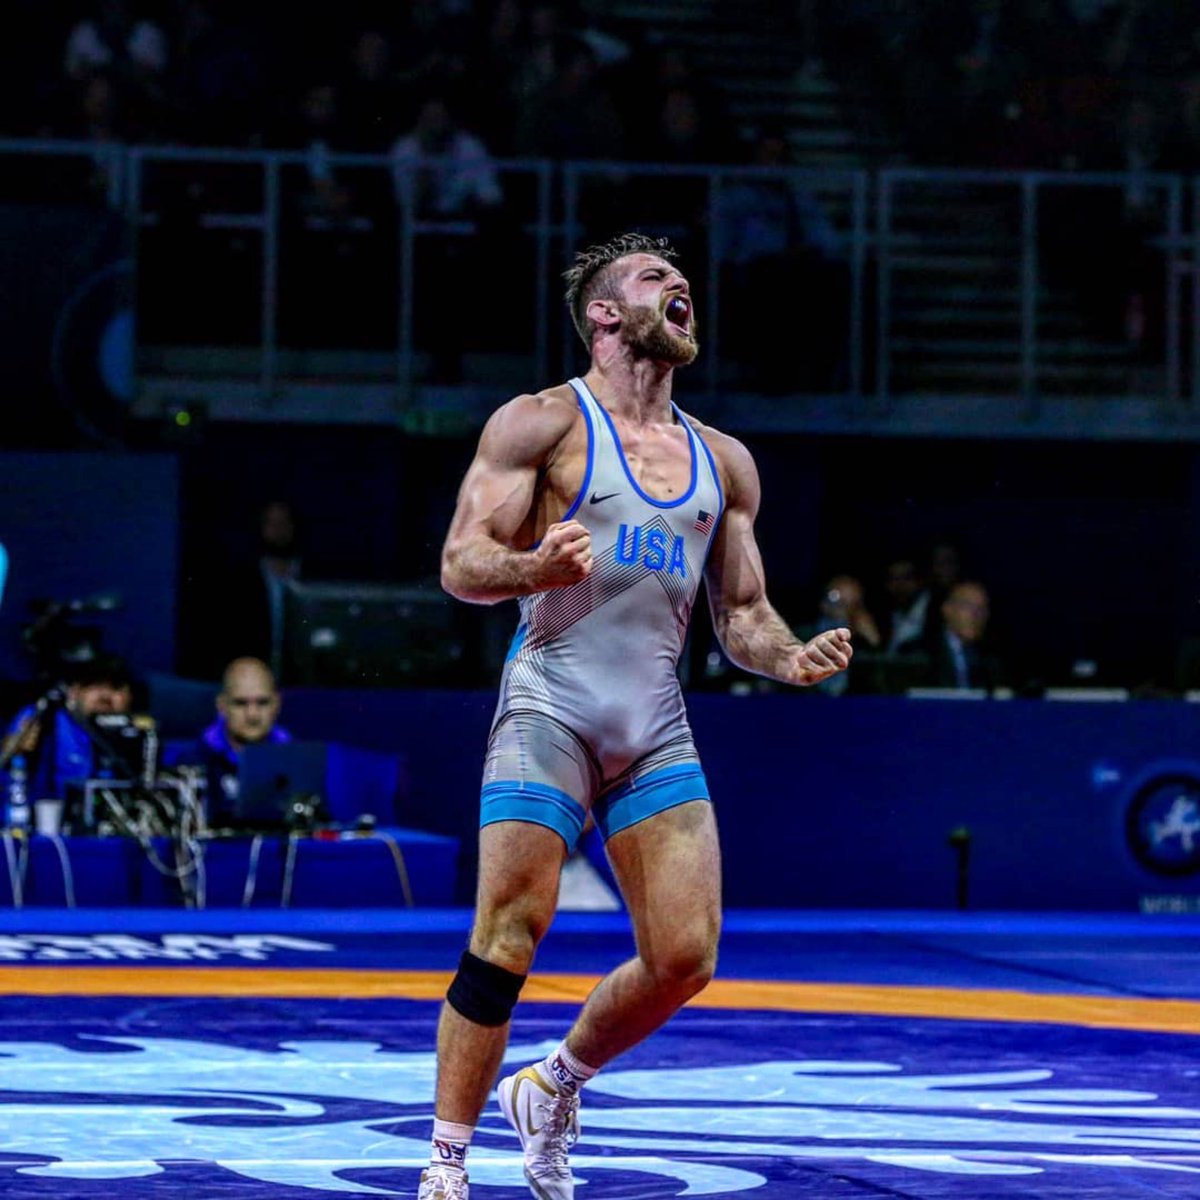 David Taylor more match! What a freakin day! Tomorrow we will have 8 men battling for medals! We will continue to scrap for every point! The morning rounds